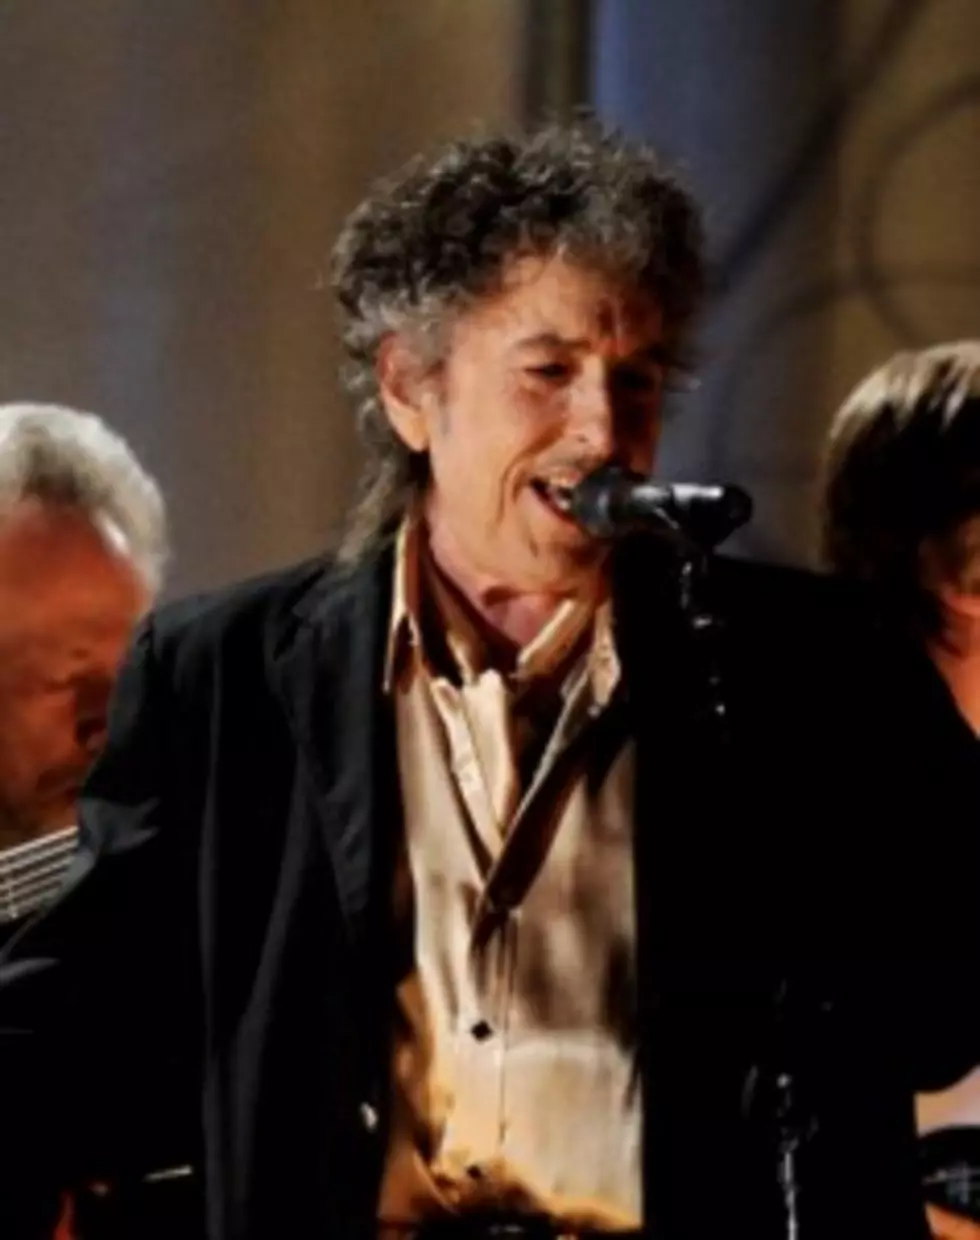 Interview Reveals Dylan Was Suicidal And Addicted